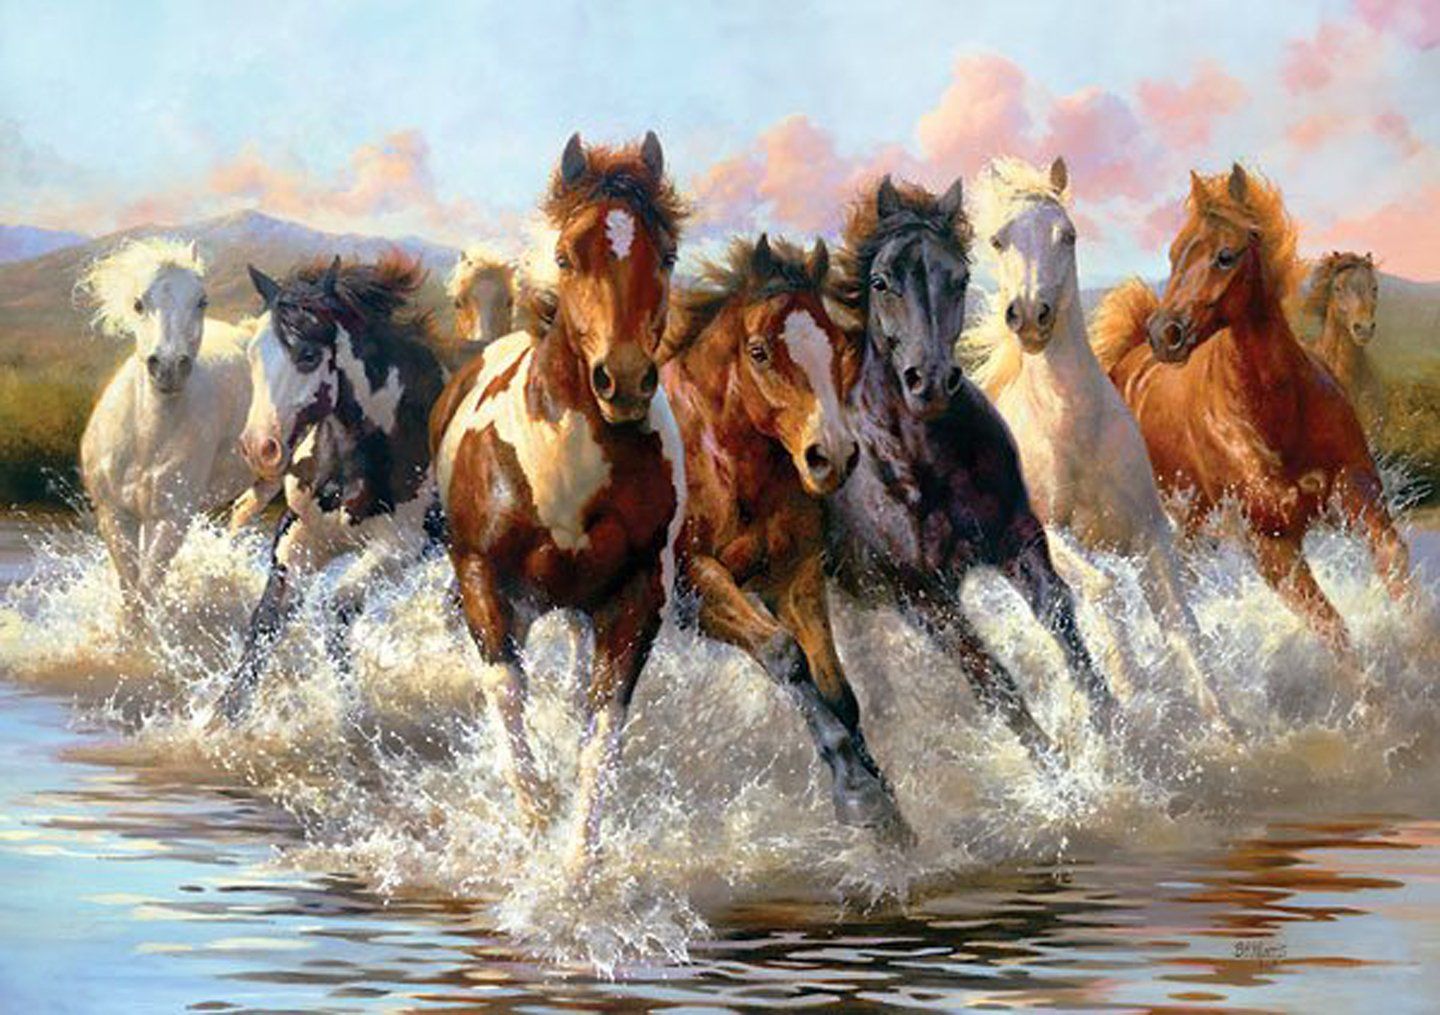 Horses Painting